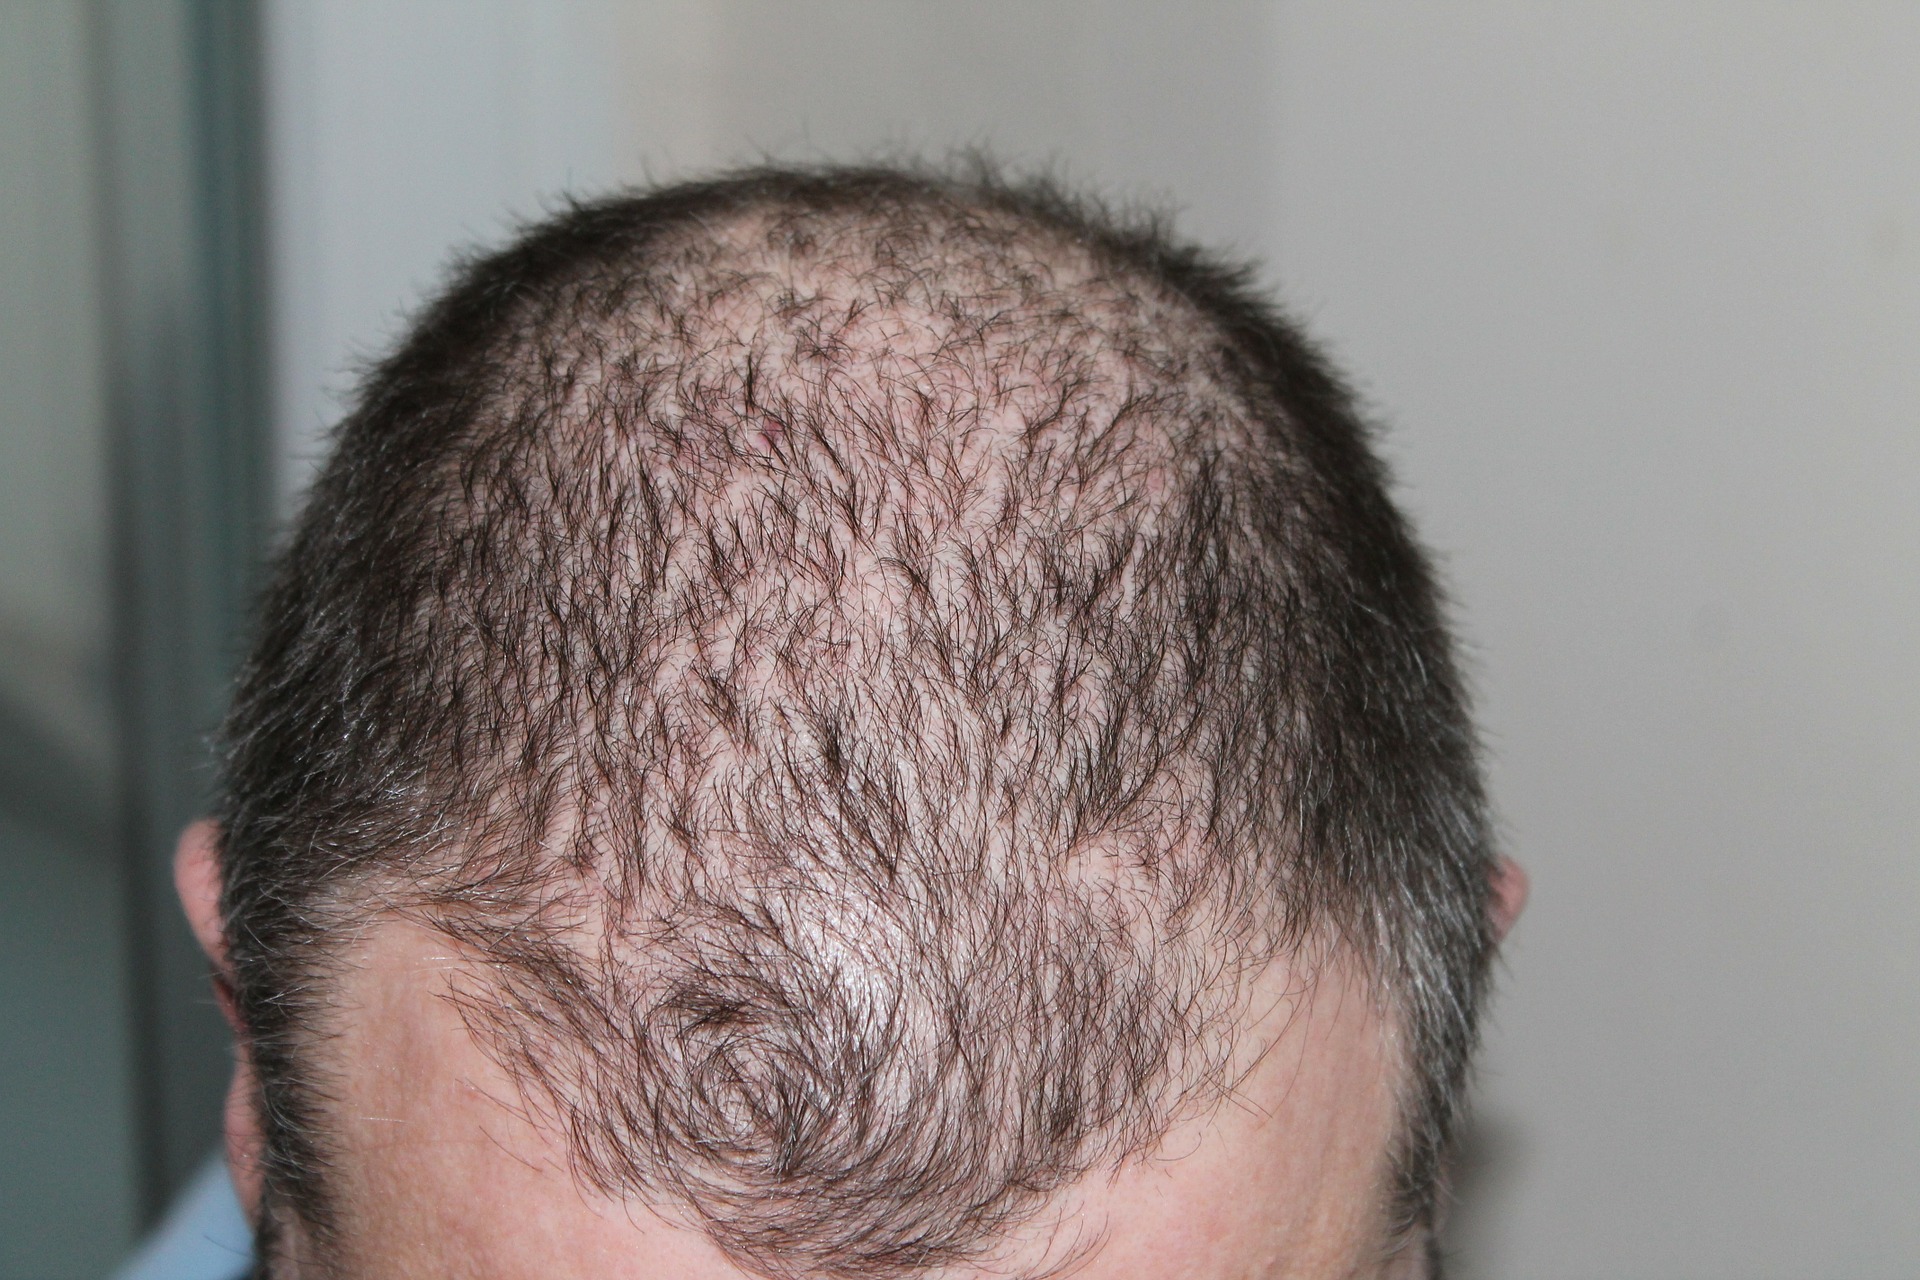 hair loss affects a large volume of the population and can be impacting on self esteem